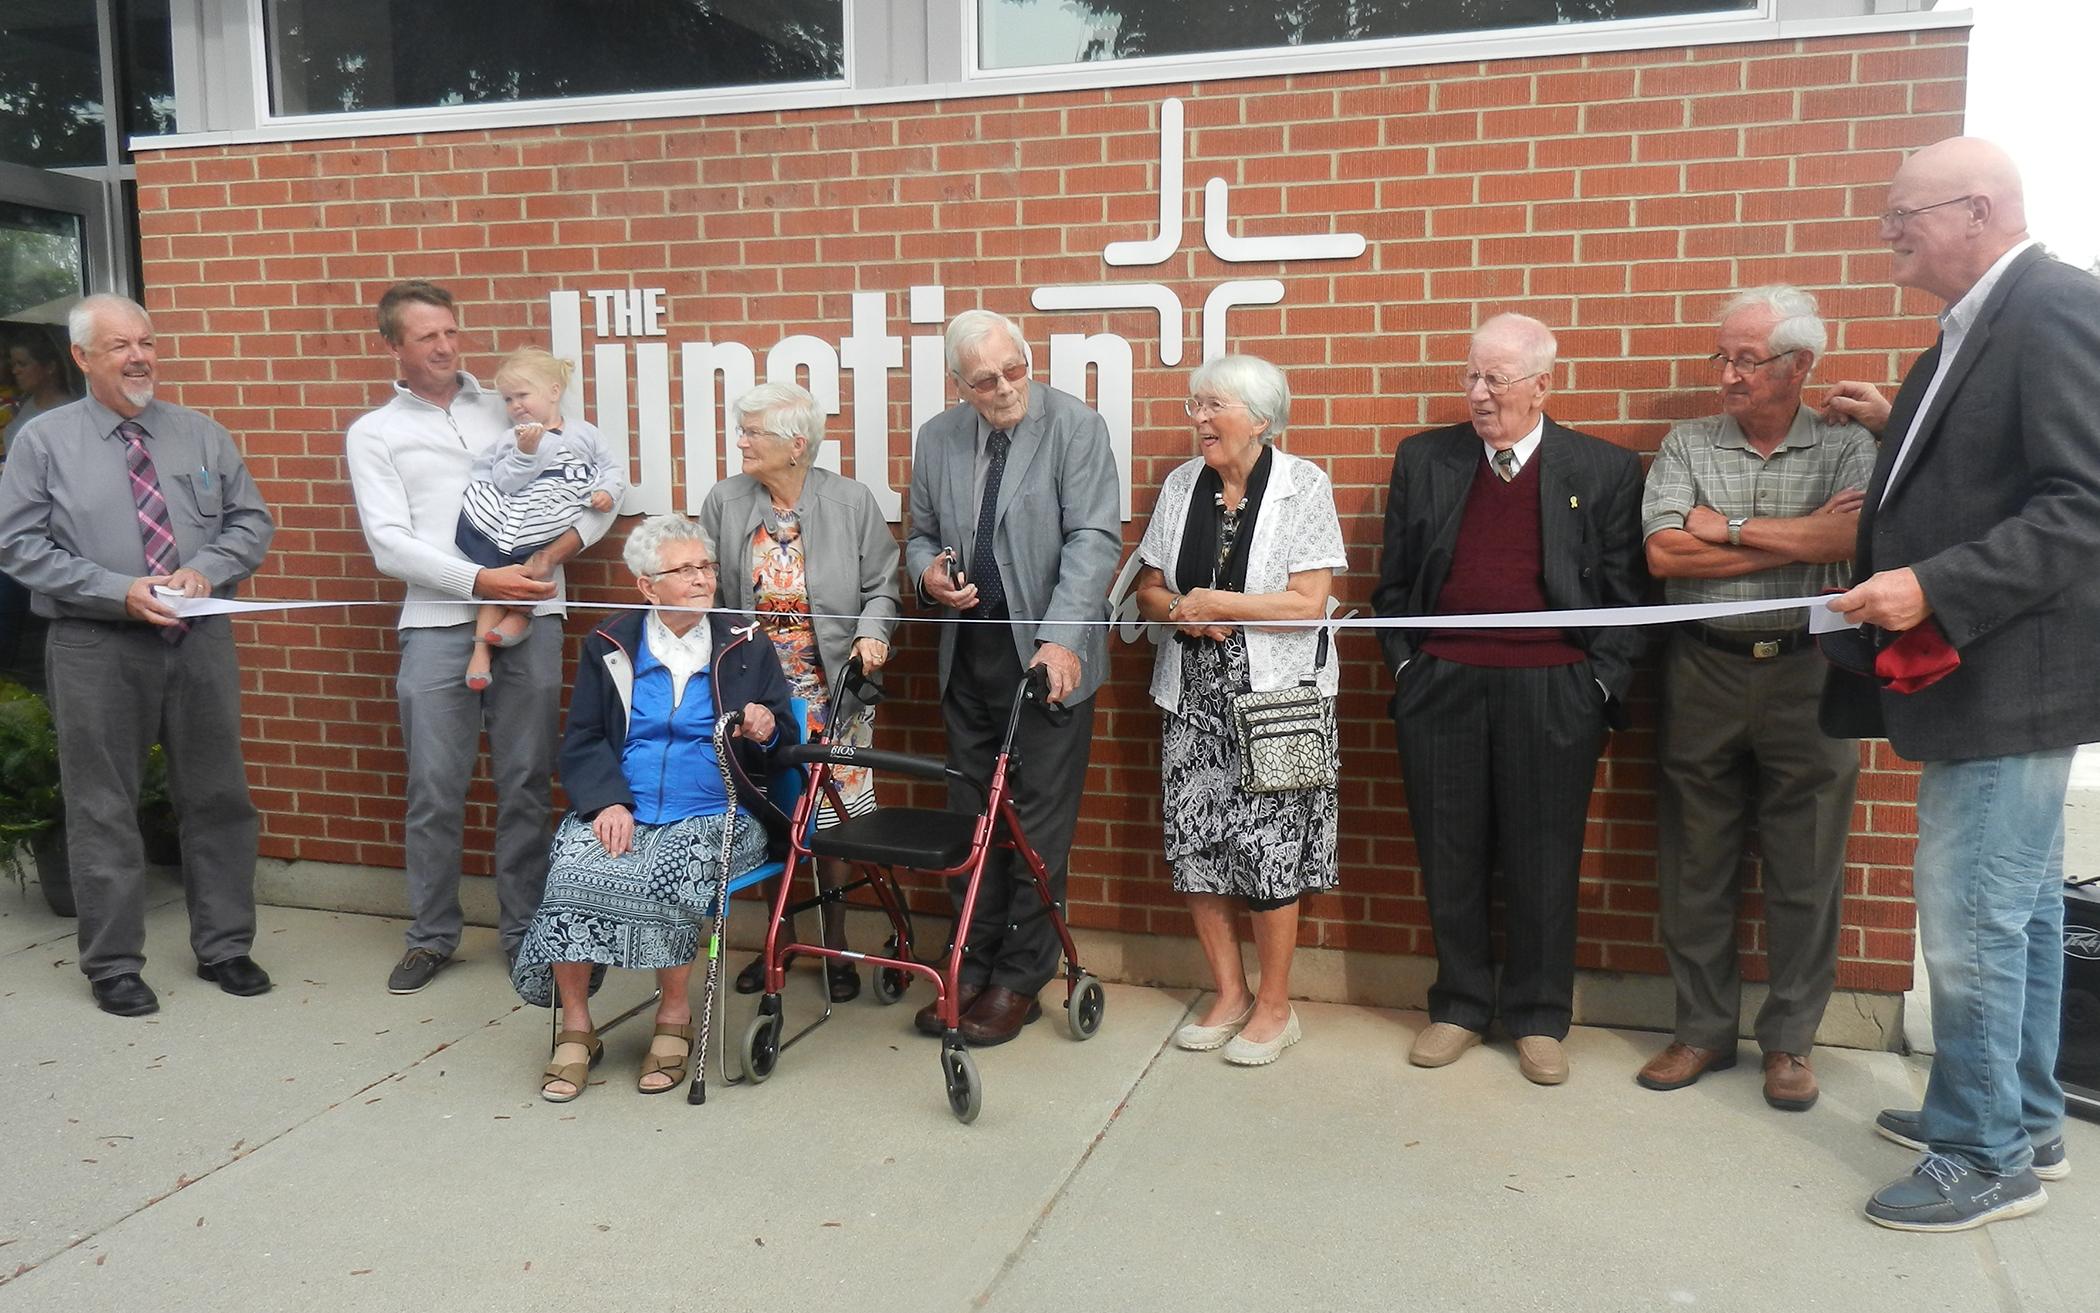 The Junction Church's pastor and chair of council are joined by the youngest, oldest, and some founding members to mark the dedication of their newly renovated church building.